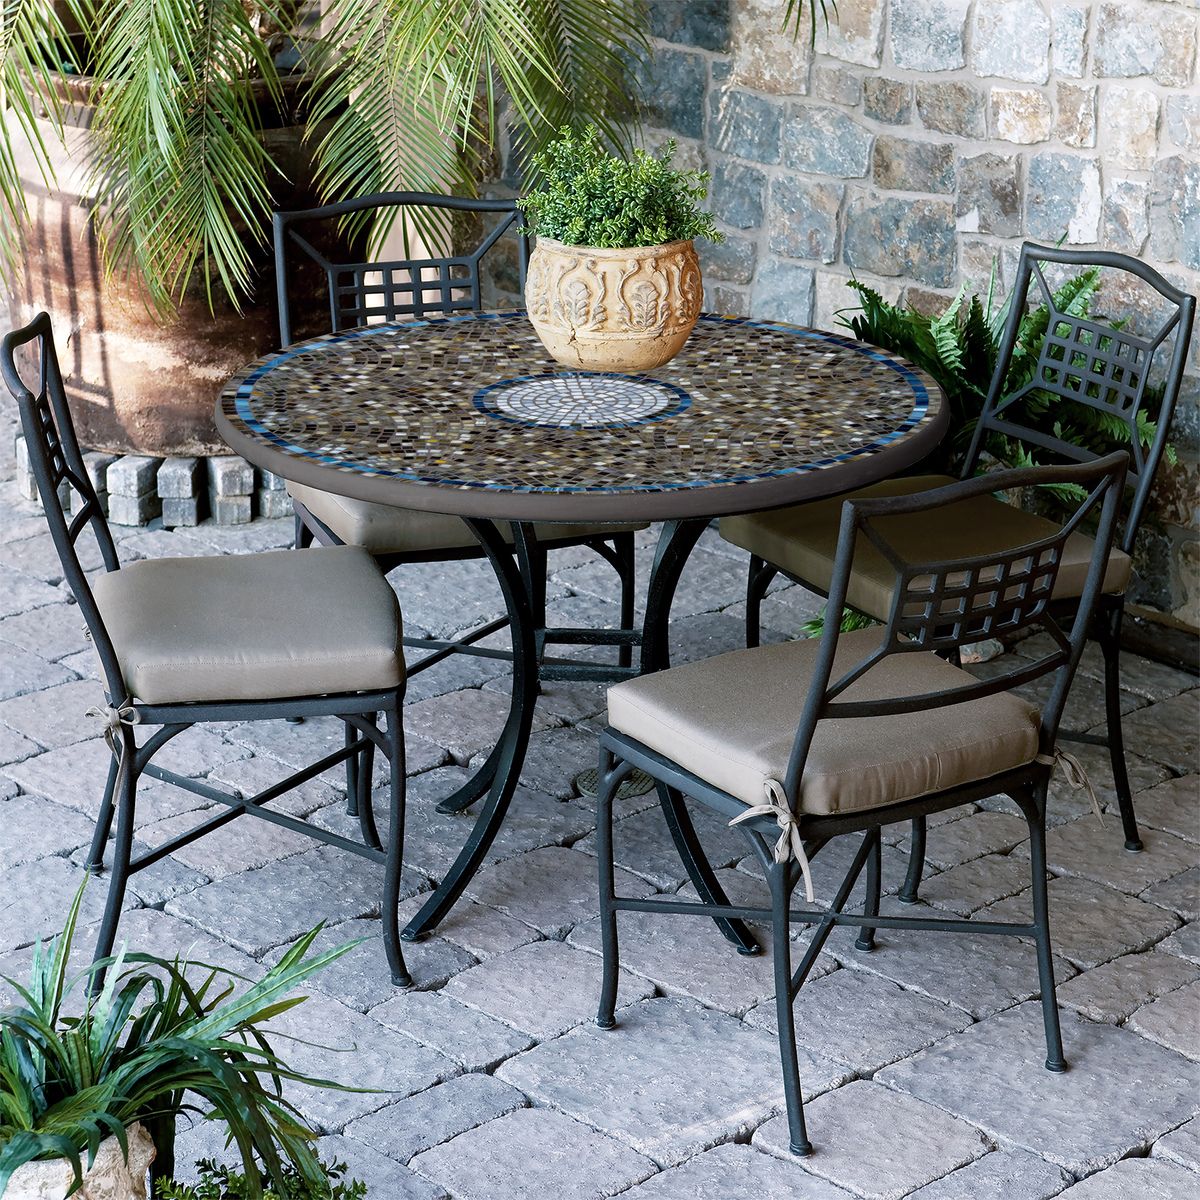 Slate Glass Mosaic Patio Table-Iron Accents